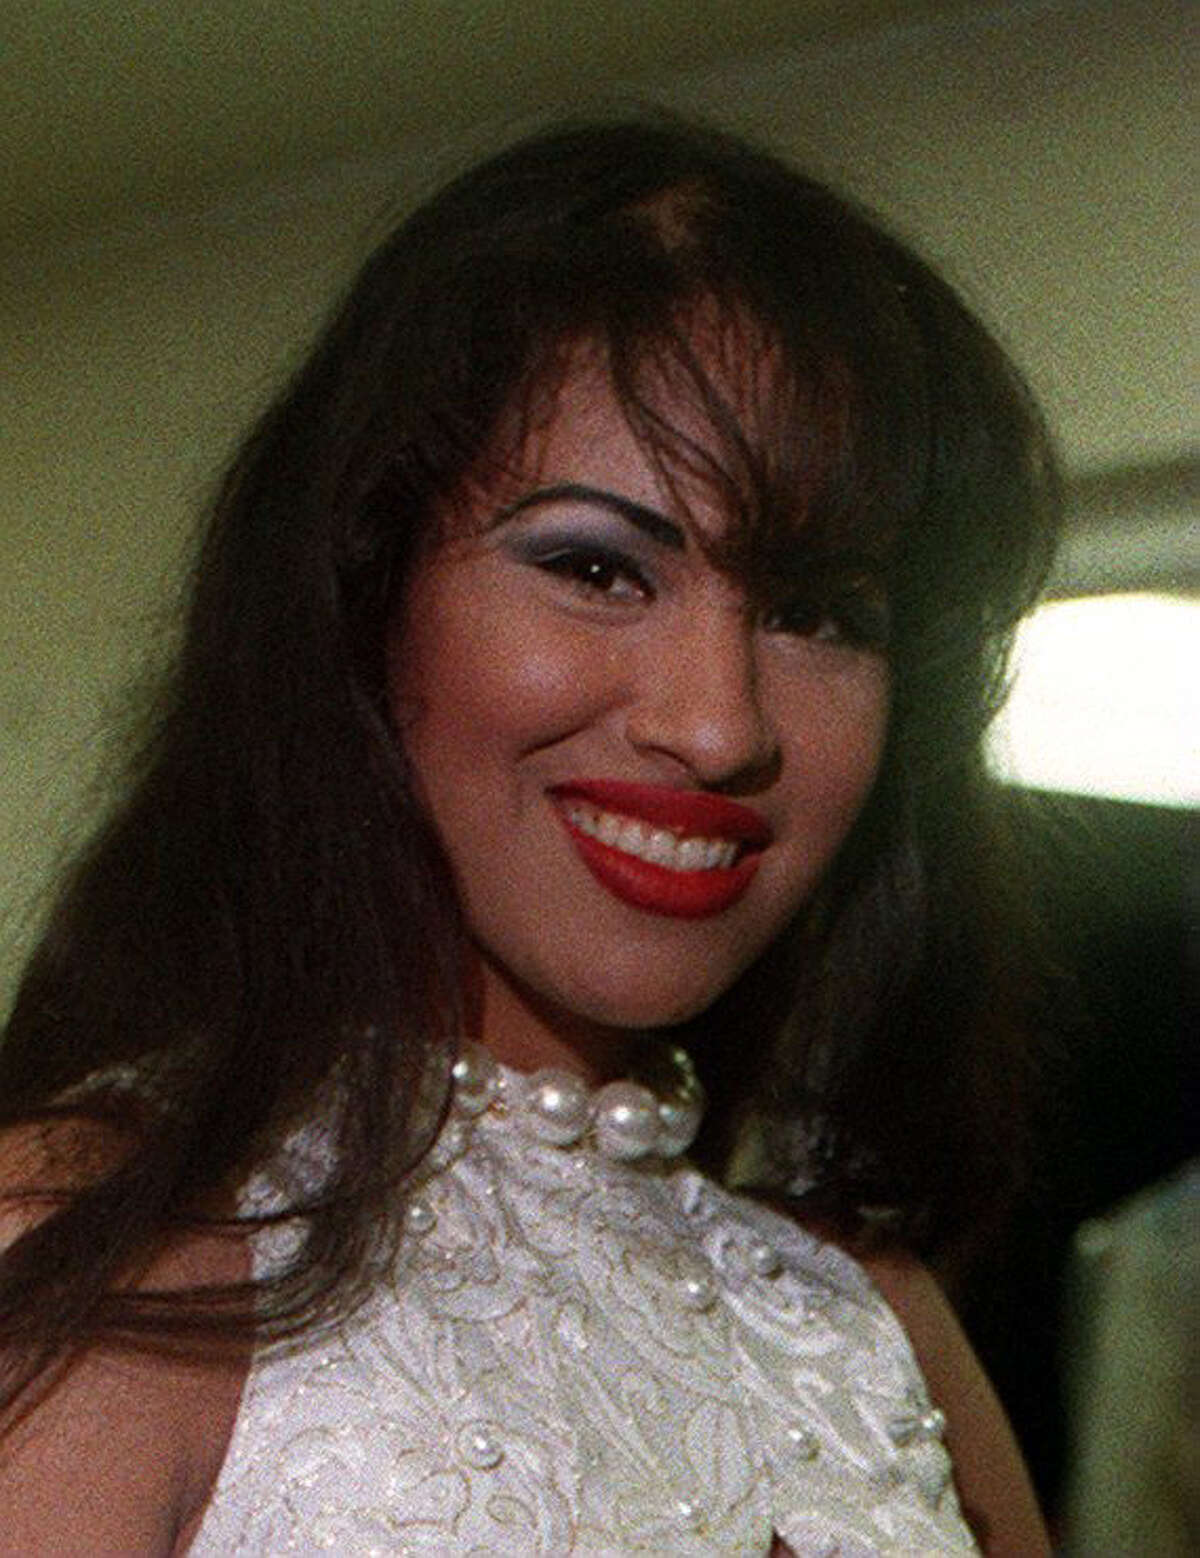 If Selena were alive today...